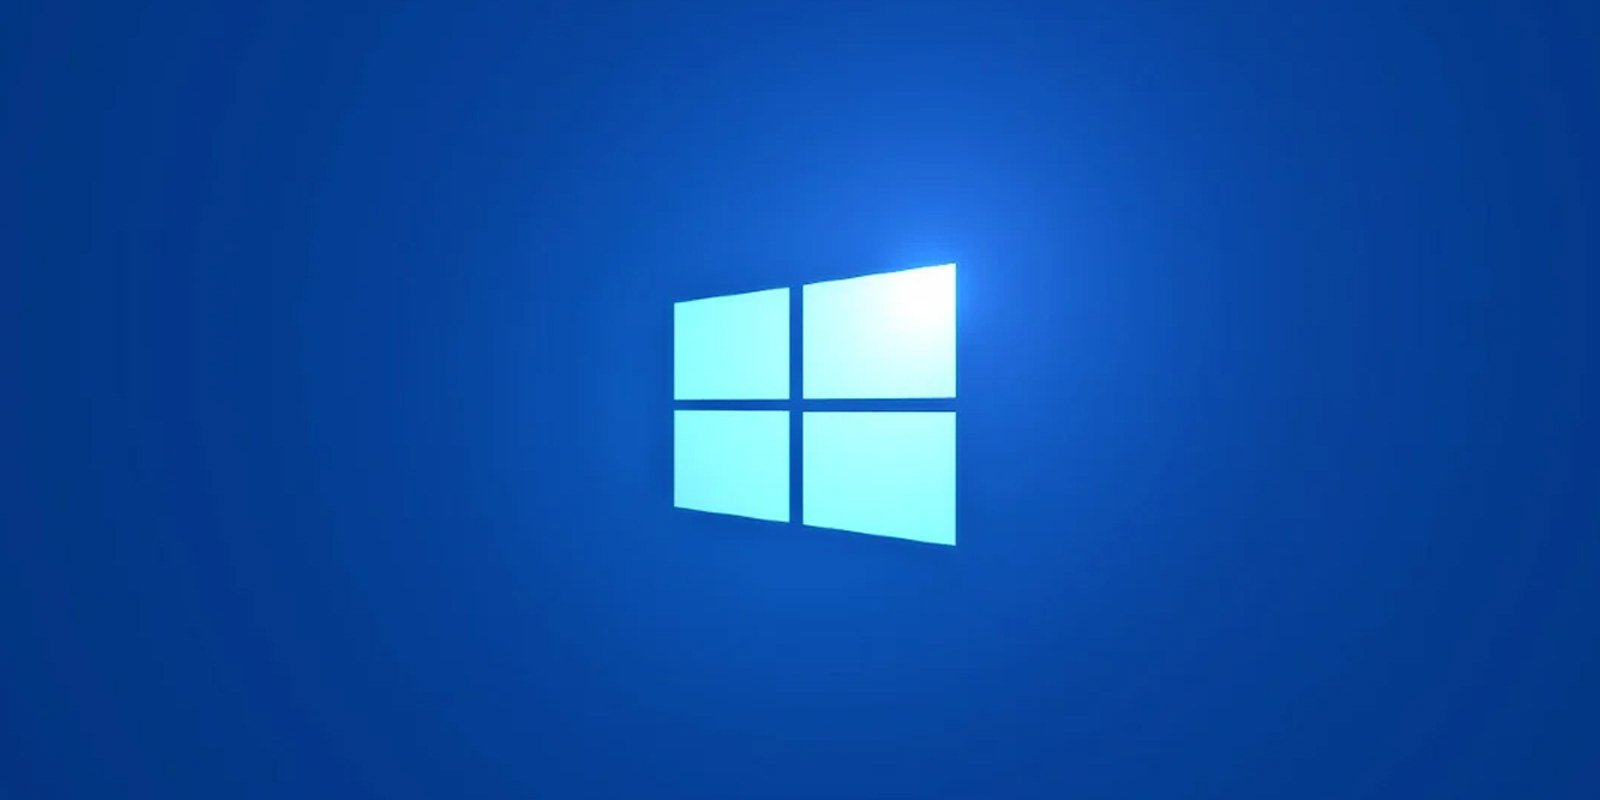 Windows 10 21H2 adds ransomware protection to security baseline